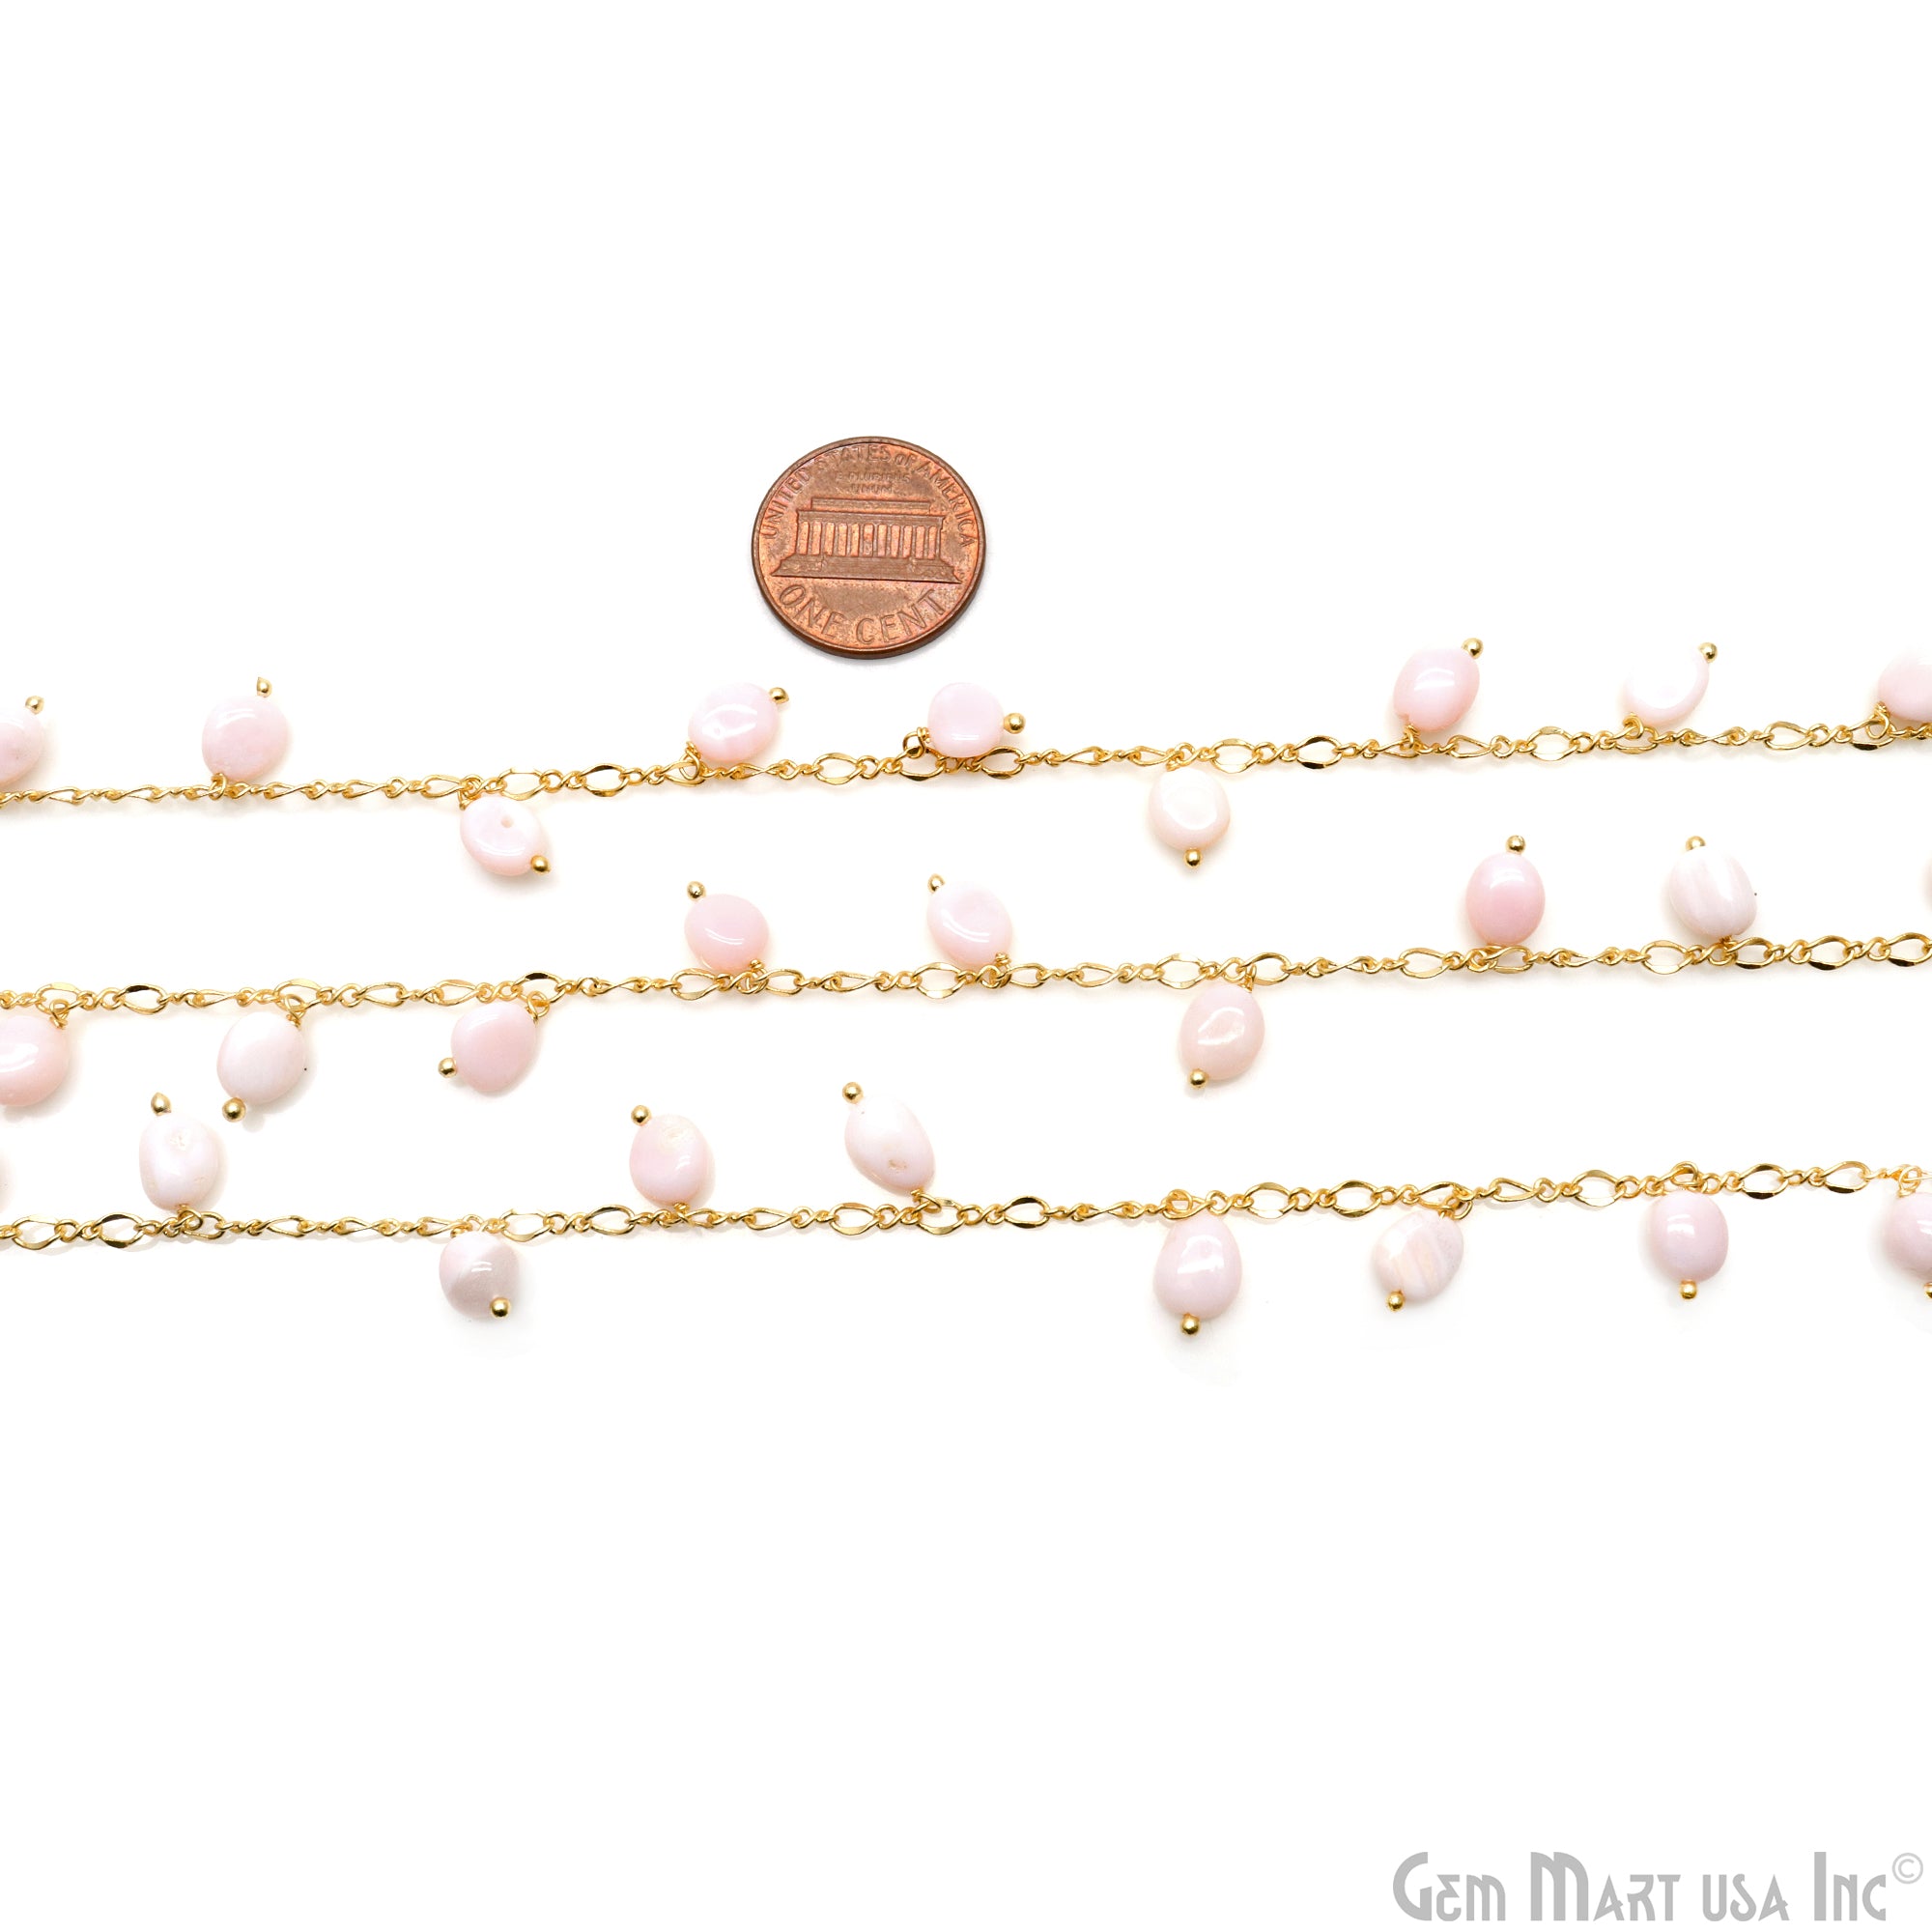 Pink Opal Tumble Beads 8x5mm Gold Plated Cluster Dangle Chain